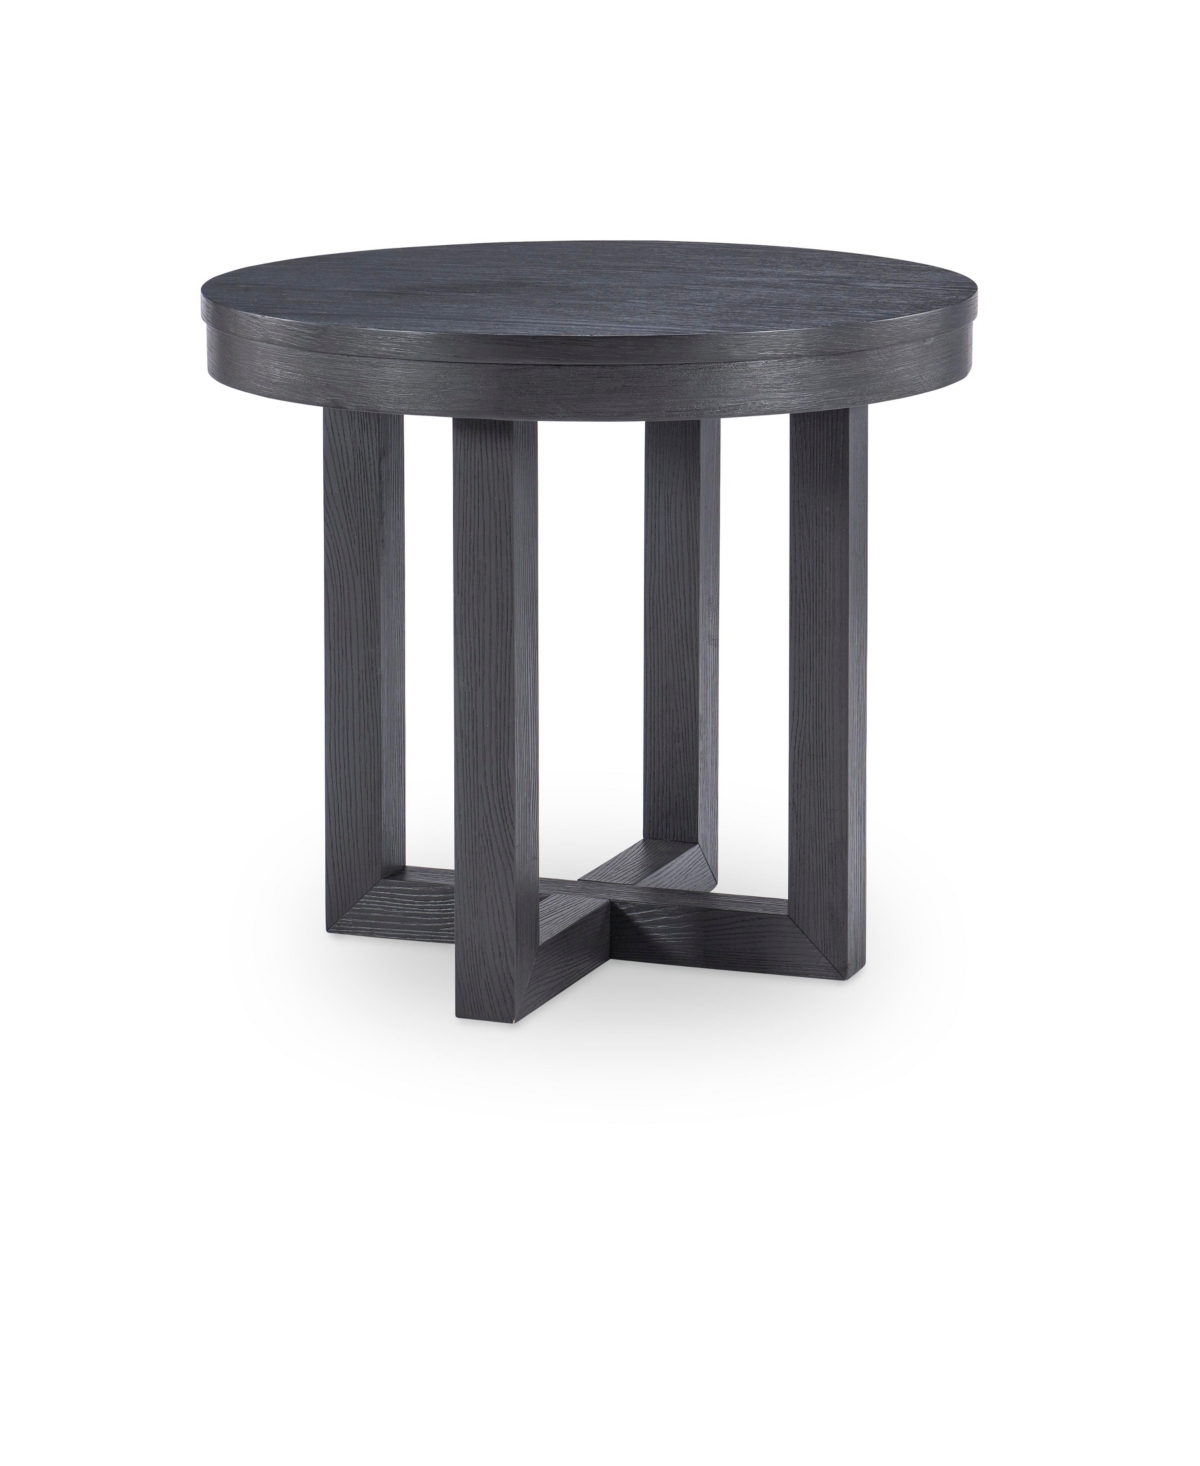 Furniture Westwood Round Lamp Table In Charred Oak